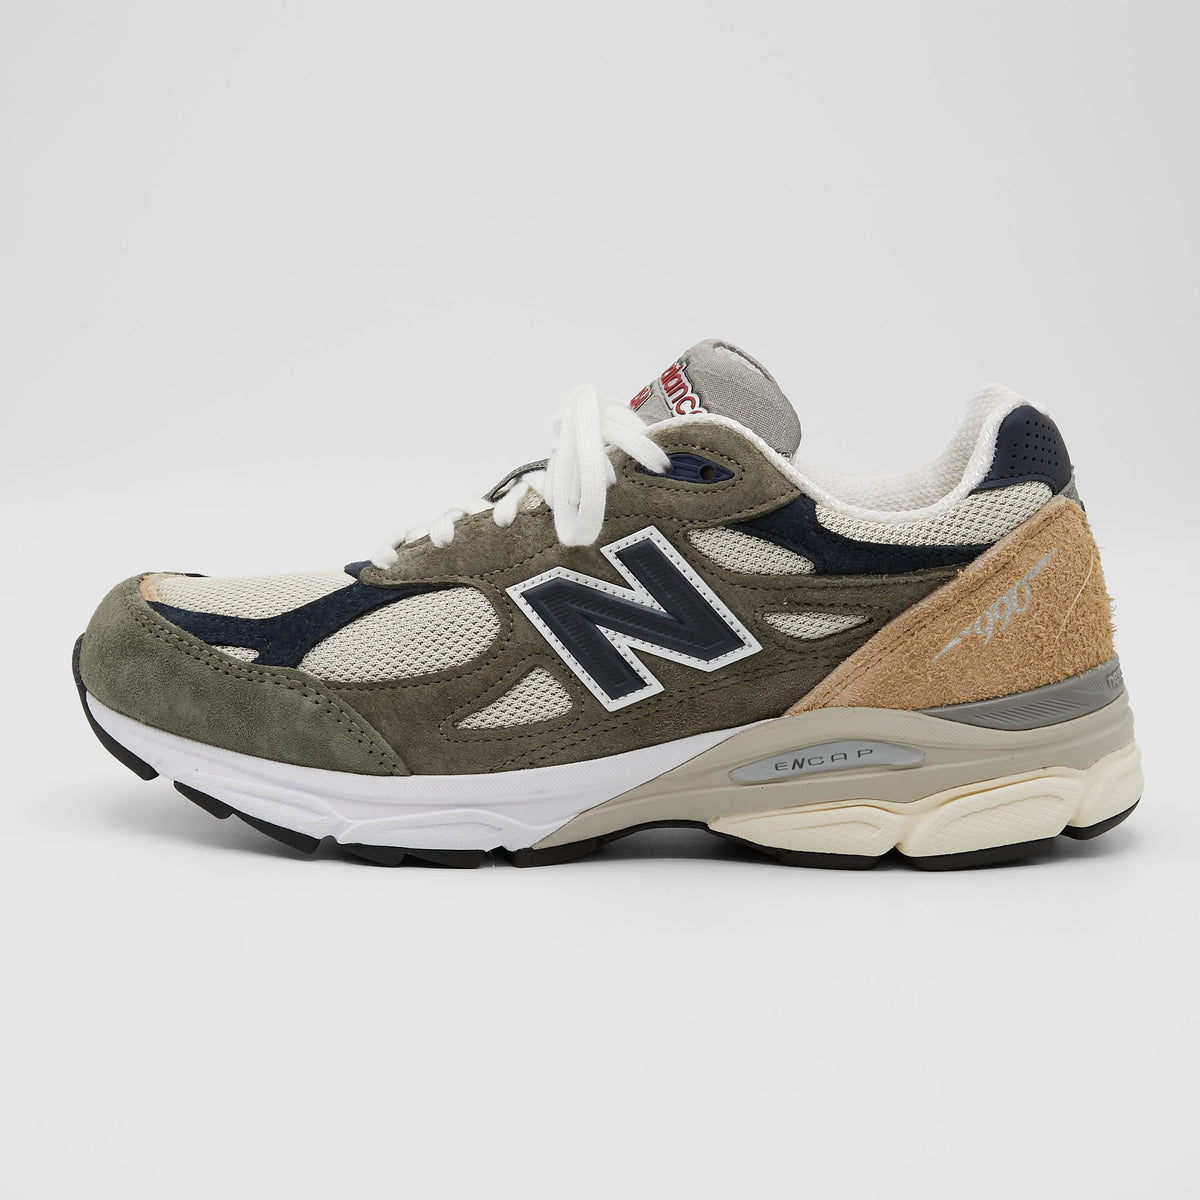 New Balance Made in USA 990v3 M990T03 Sneaker